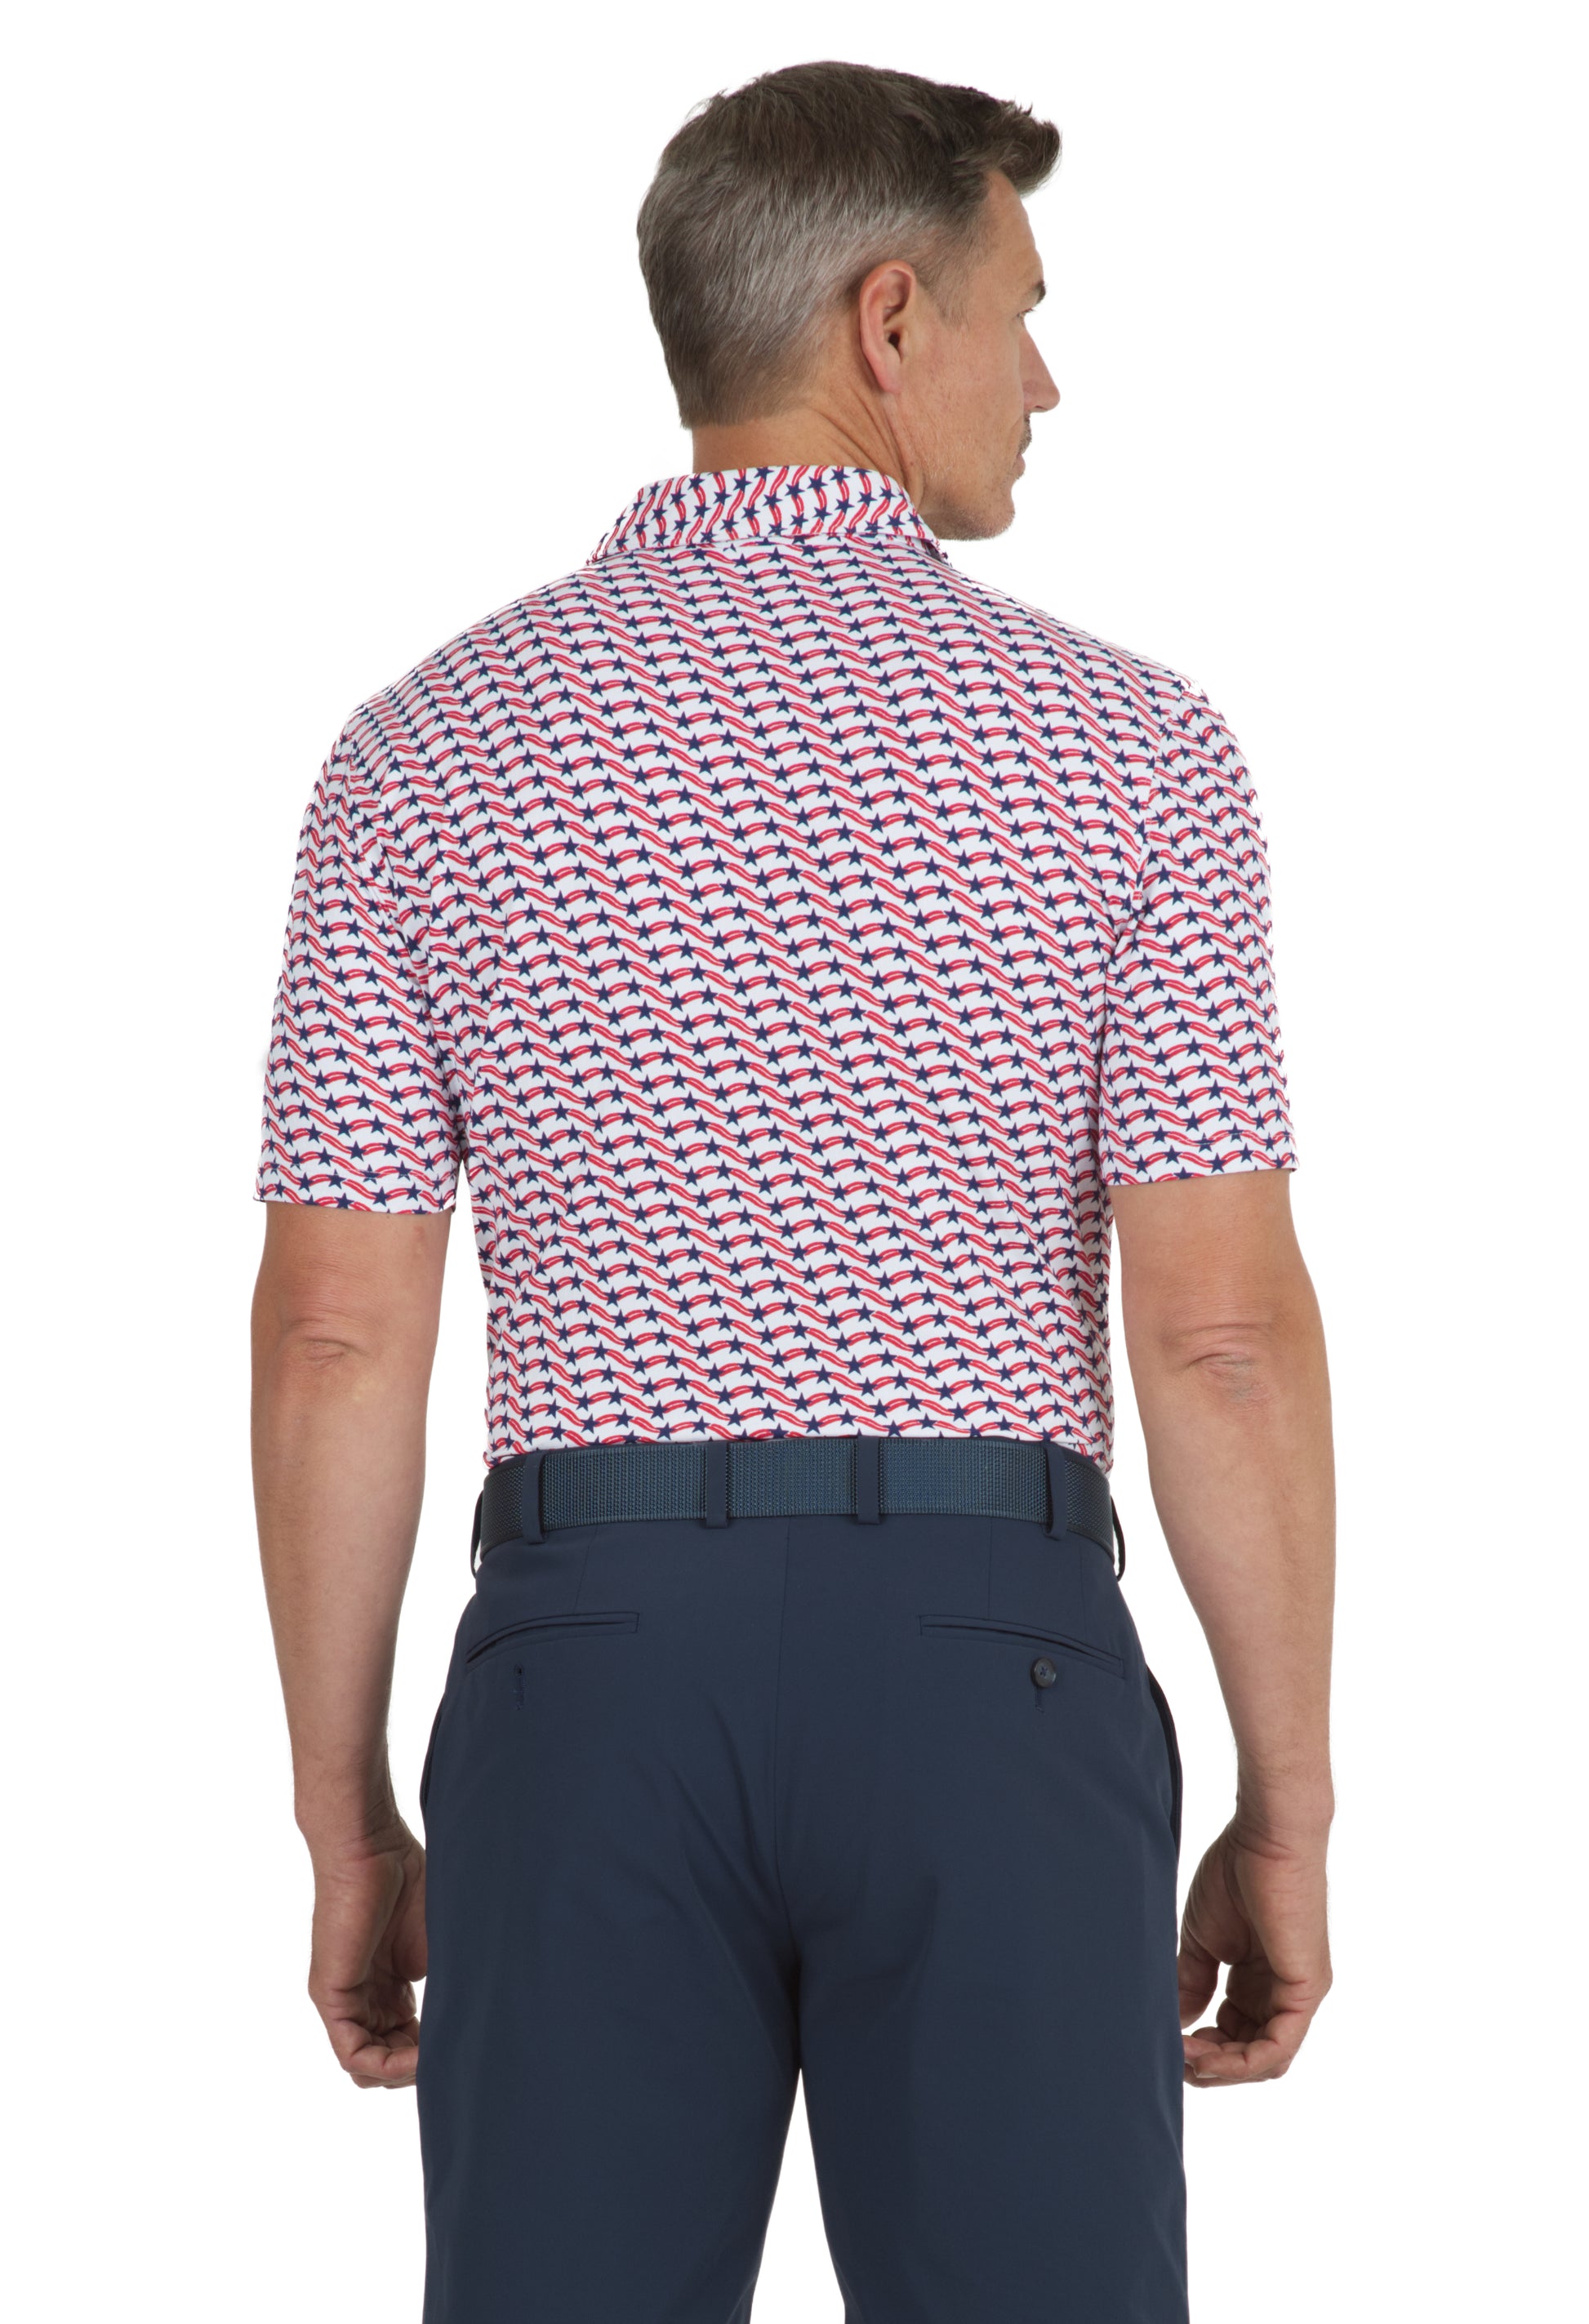 IBKÜL - Waving Stars & Stripes Print Short Sleeve Polo - 94145 (Modern Fit) - Color: Red/White